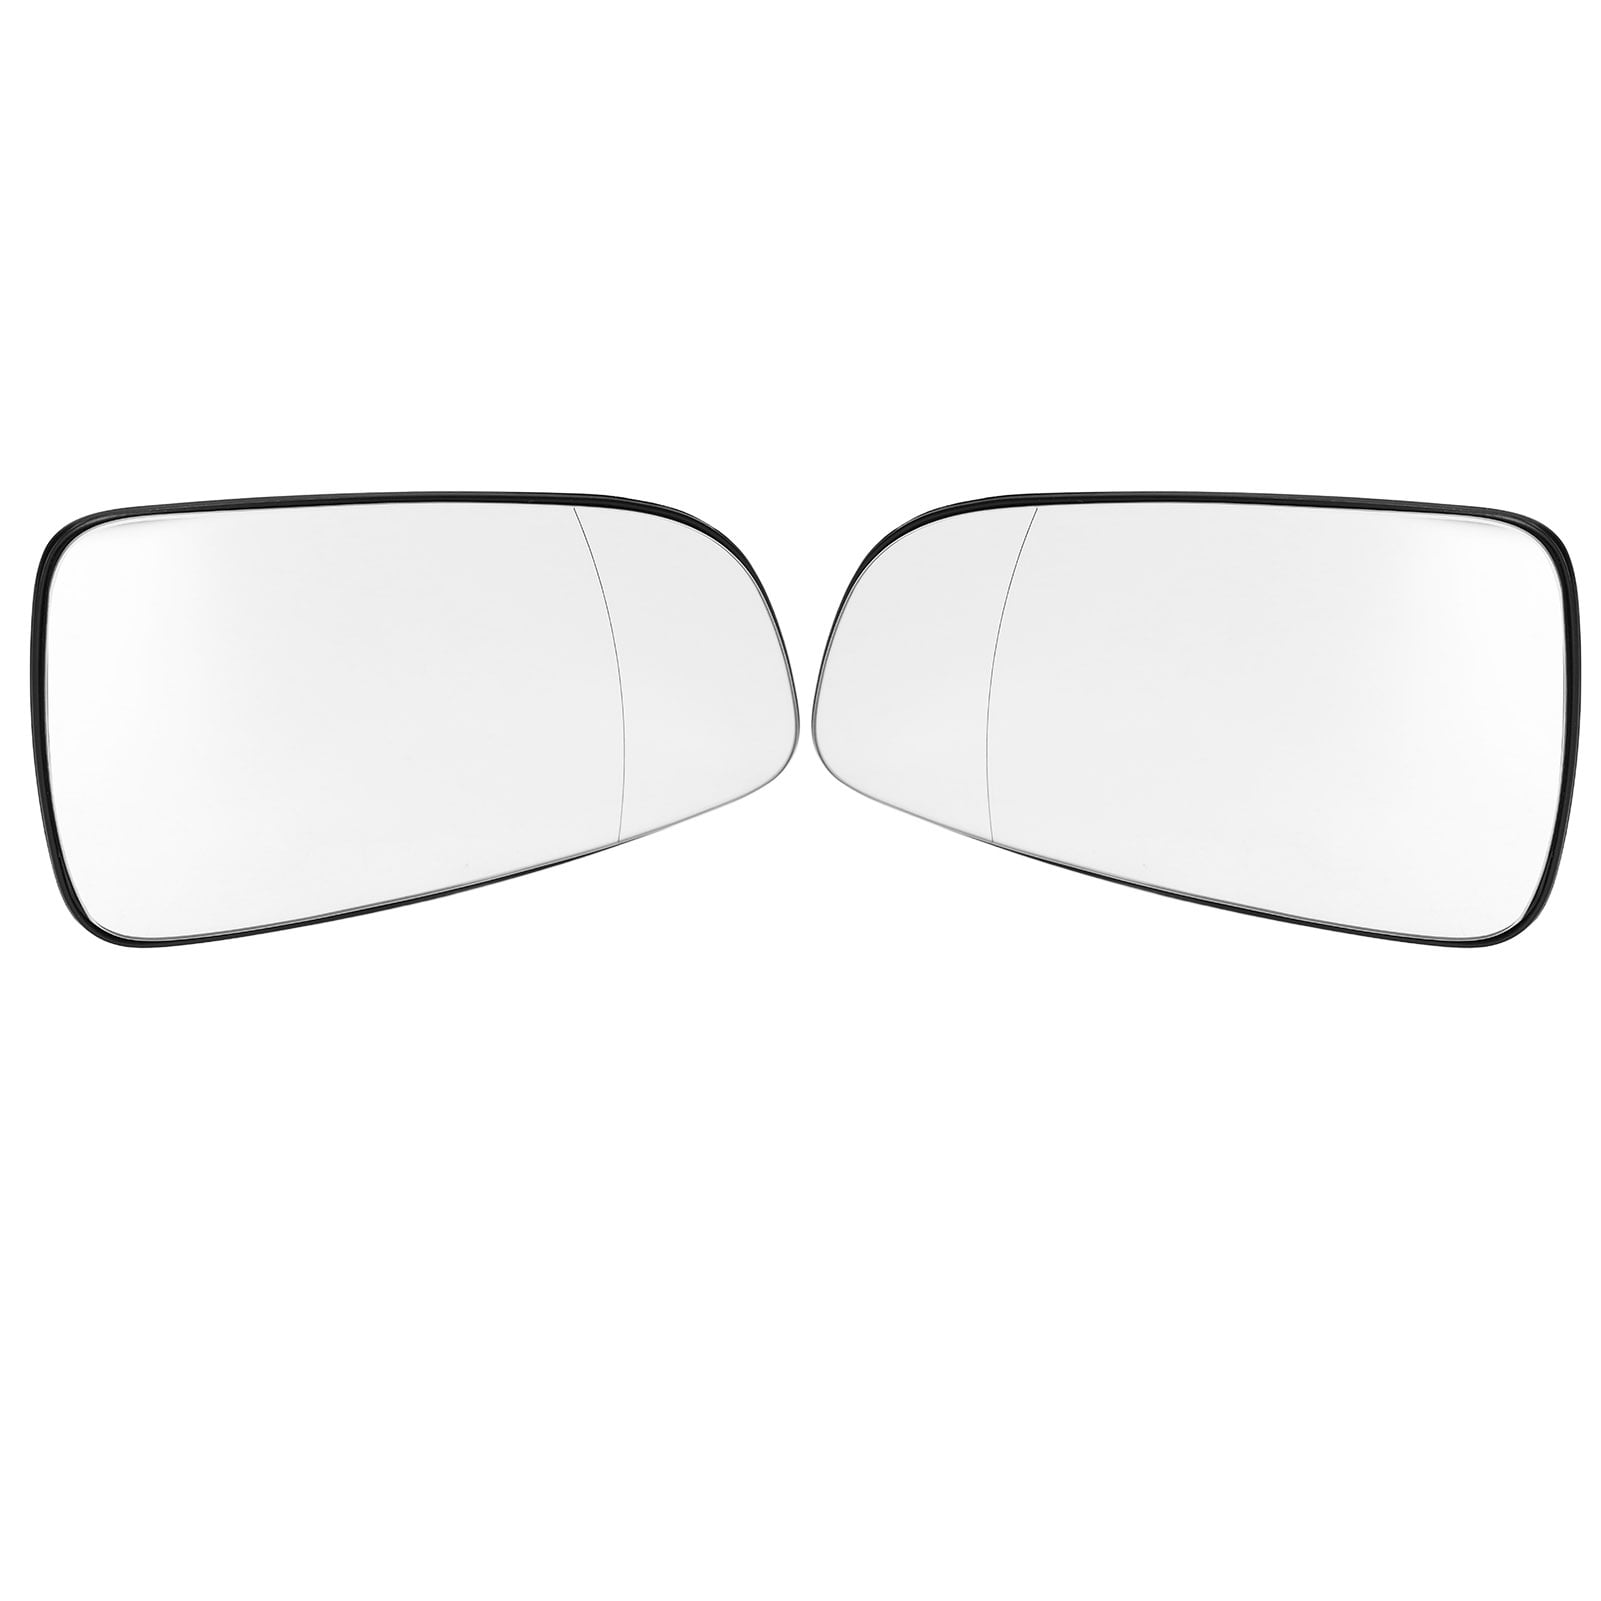 Passenger Side Mirror Replacement Glass Fits 2003-2006 Porsche Cayenne Adhesive